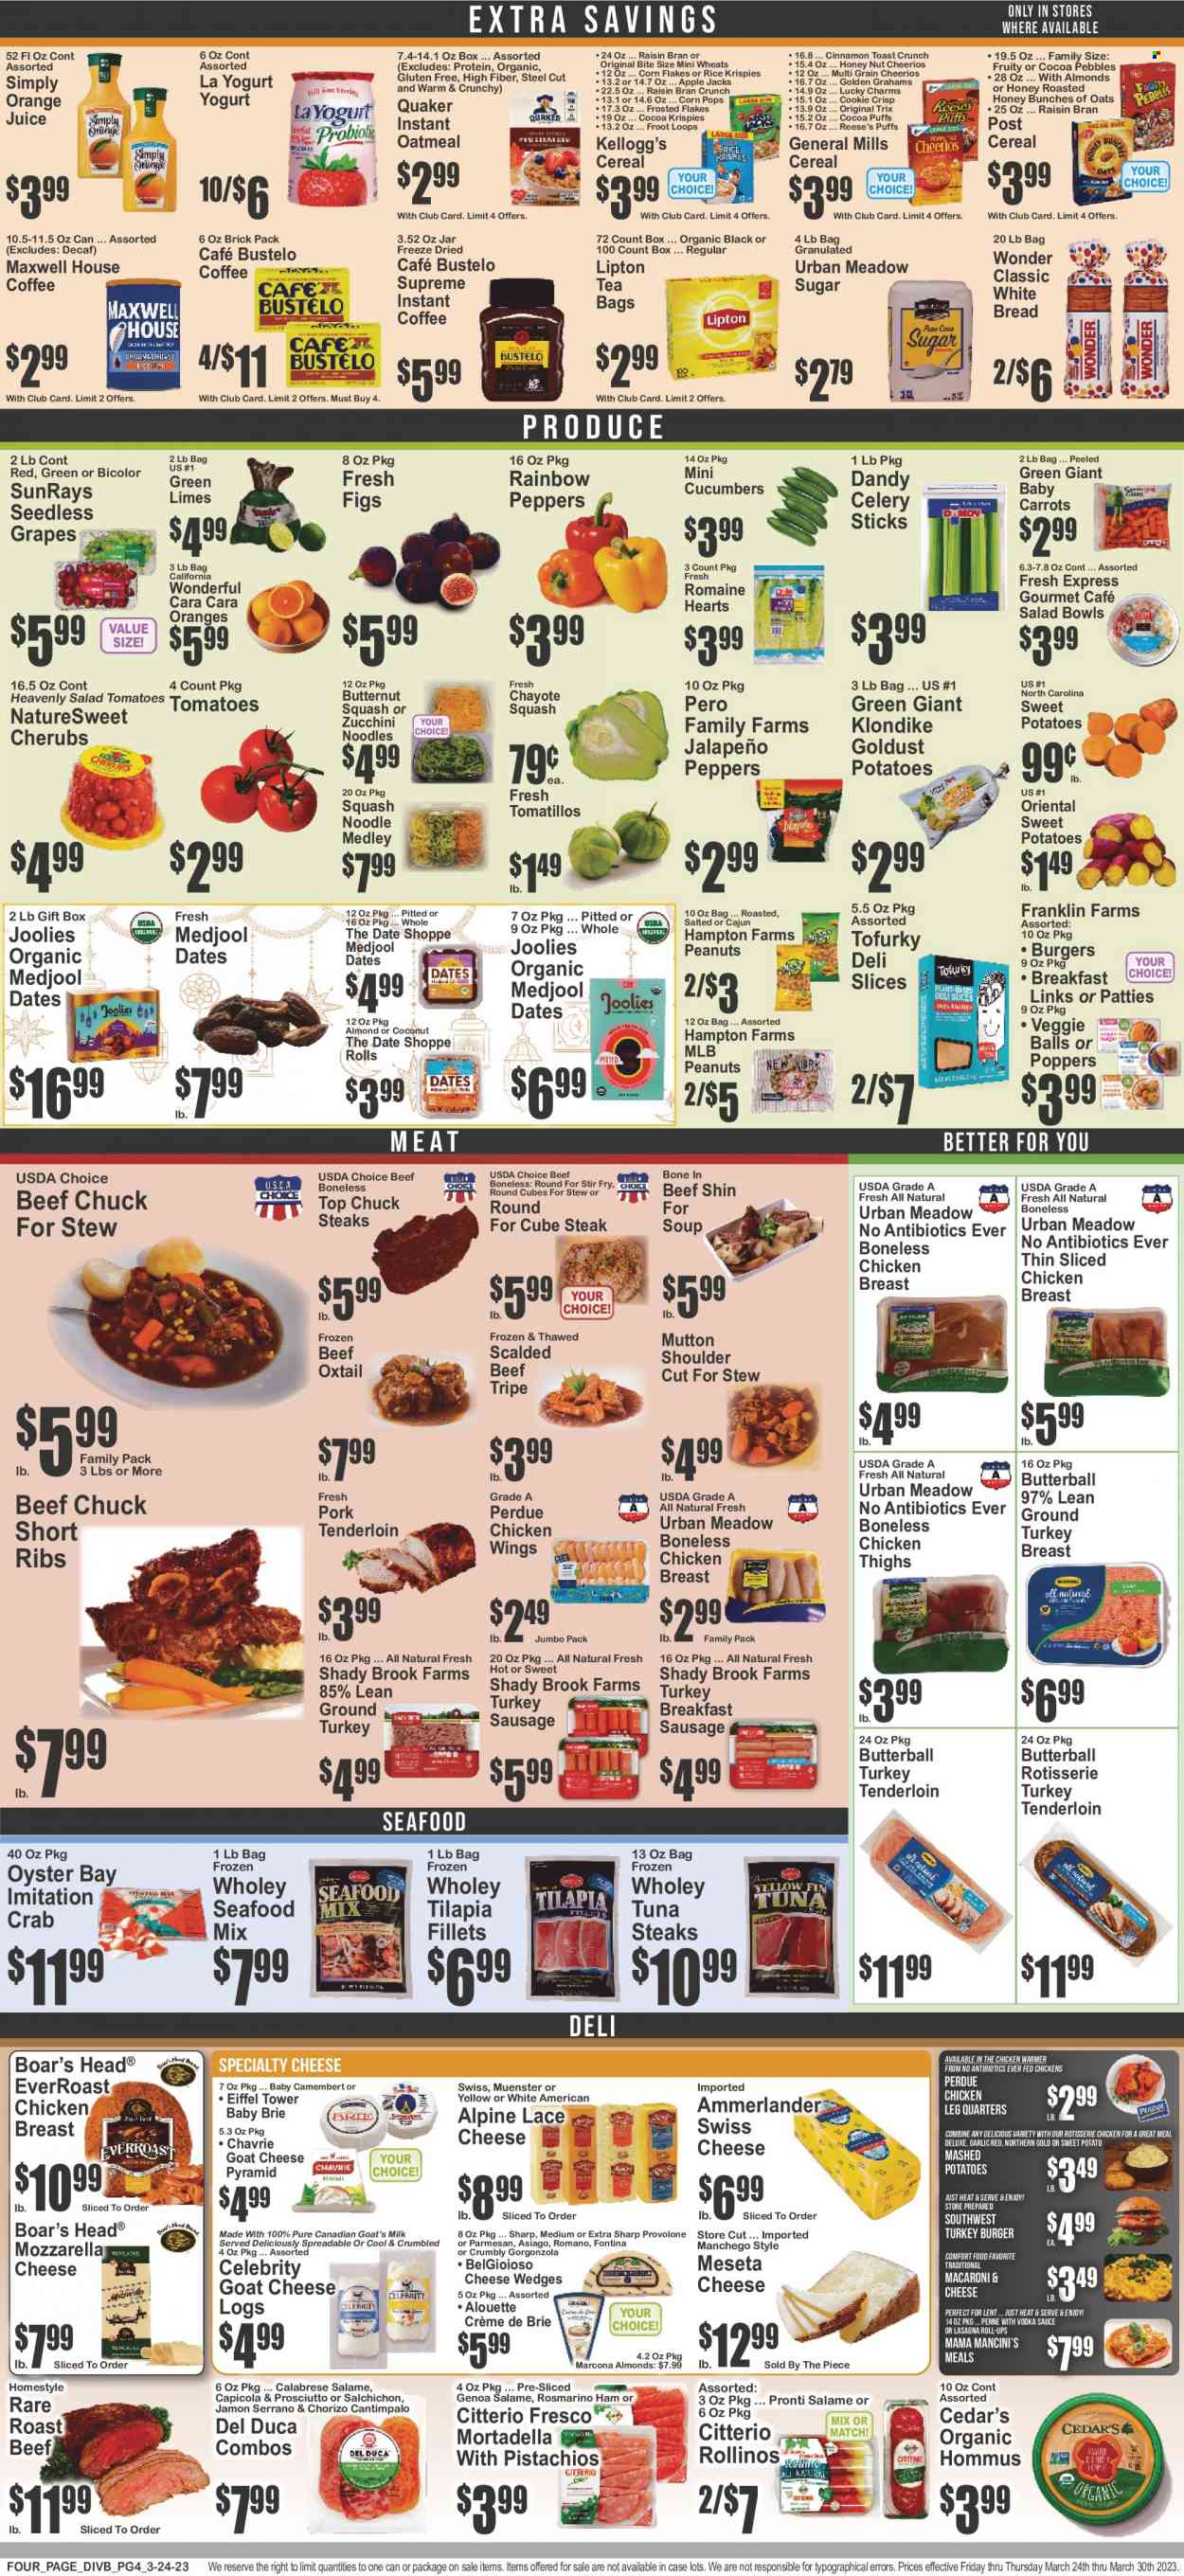 thumbnail - The Food Emporium Flyer - 03/24/2023 - 03/30/2023 - Sales products - bread, white bread, puffs, butternut squash, carrots, cucumber, garlic, sweet potato, tomatillo, tomatoes, zucchini, jalapeño, chayote squash, figs, grapes, limes, seedless grapes, chayote, tilapia, tuna, oysters, seafood, crab, macaroni & cheese, mashed potatoes, chicken roast, soup, hamburger, Quaker, noodles, Perdue®, roast, Butterball, mortadella, ham, prosciutto, sausage, hummus, asiago, camembert, Fontina, goat cheese, Manchego, mozzarella, swiss cheese, brie, gorgonzola, Münster cheese, Provolone, yoghurt, milk, Reese's, chicken wings, Kellogg's, celery sticks, sugar, oatmeal, cereals, Cheerios, corn flakes, Rice Krispies, Trix, Frosted Flakes, Corn Pops, Raisin Bran, penne, cinnamon, peanuts, dried dates, juice, Lipton, Maxwell House, tea bags, coffee, instant coffee, vodka, ground turkey, turkey breast, chicken breasts, chicken legs, chicken thighs, turkey tenderloin, chicken, beef meat, beef ribs, beef tripe, oxtail, steak, roast beef, ribs, turkey burger, pork meat, pork tenderloin, mutton meat. Page 4.